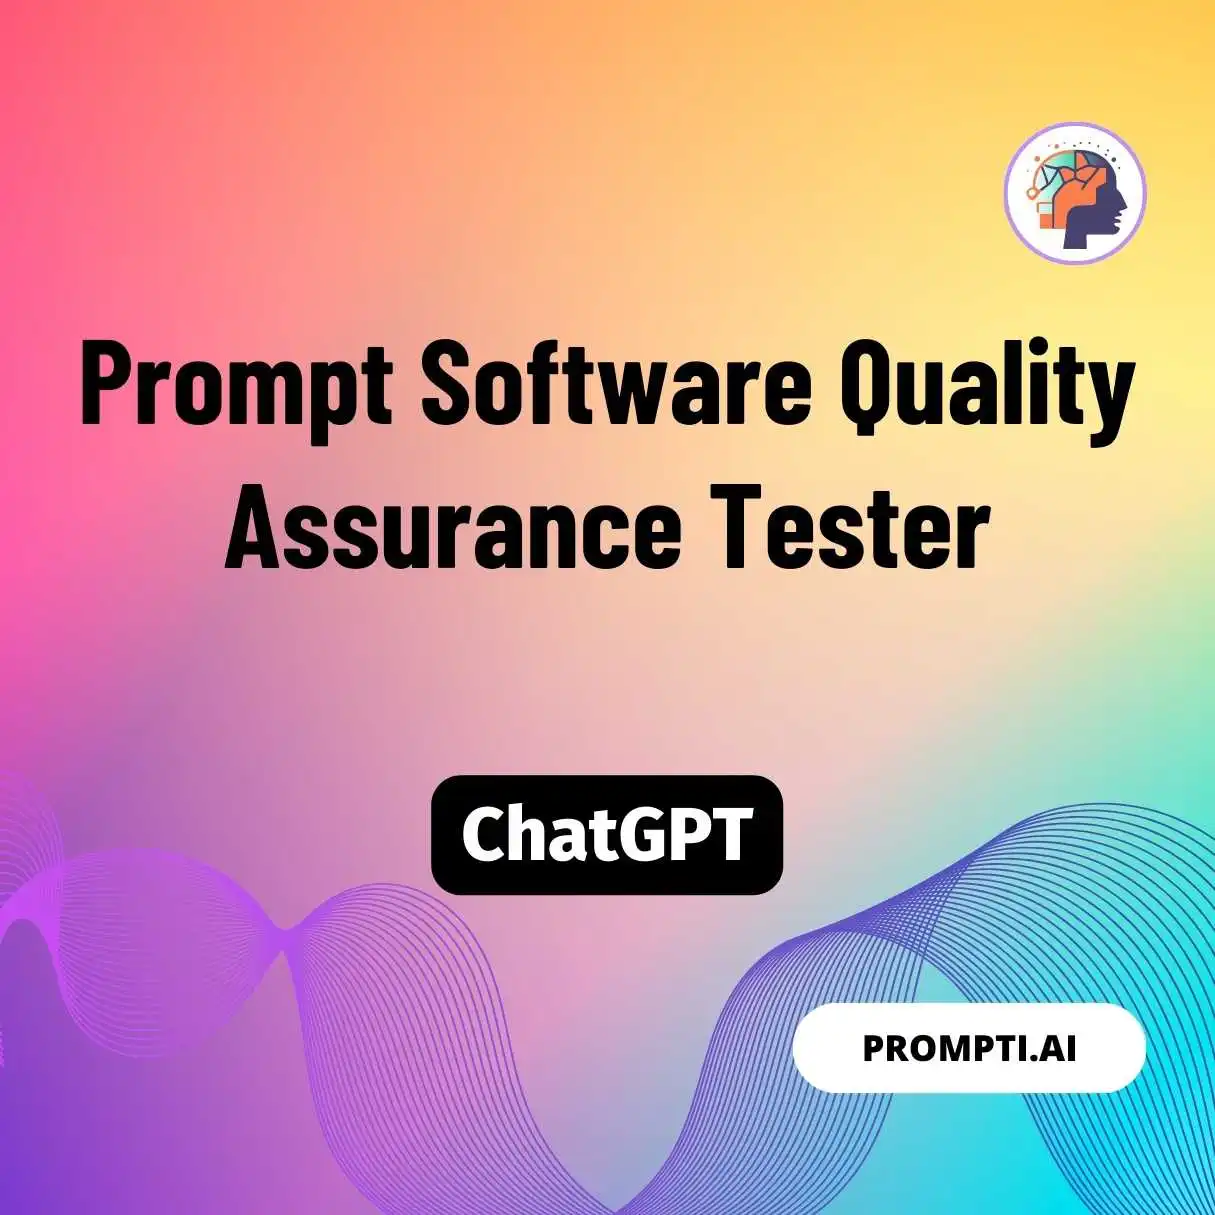 Prompt Software Quality Assurance Tester